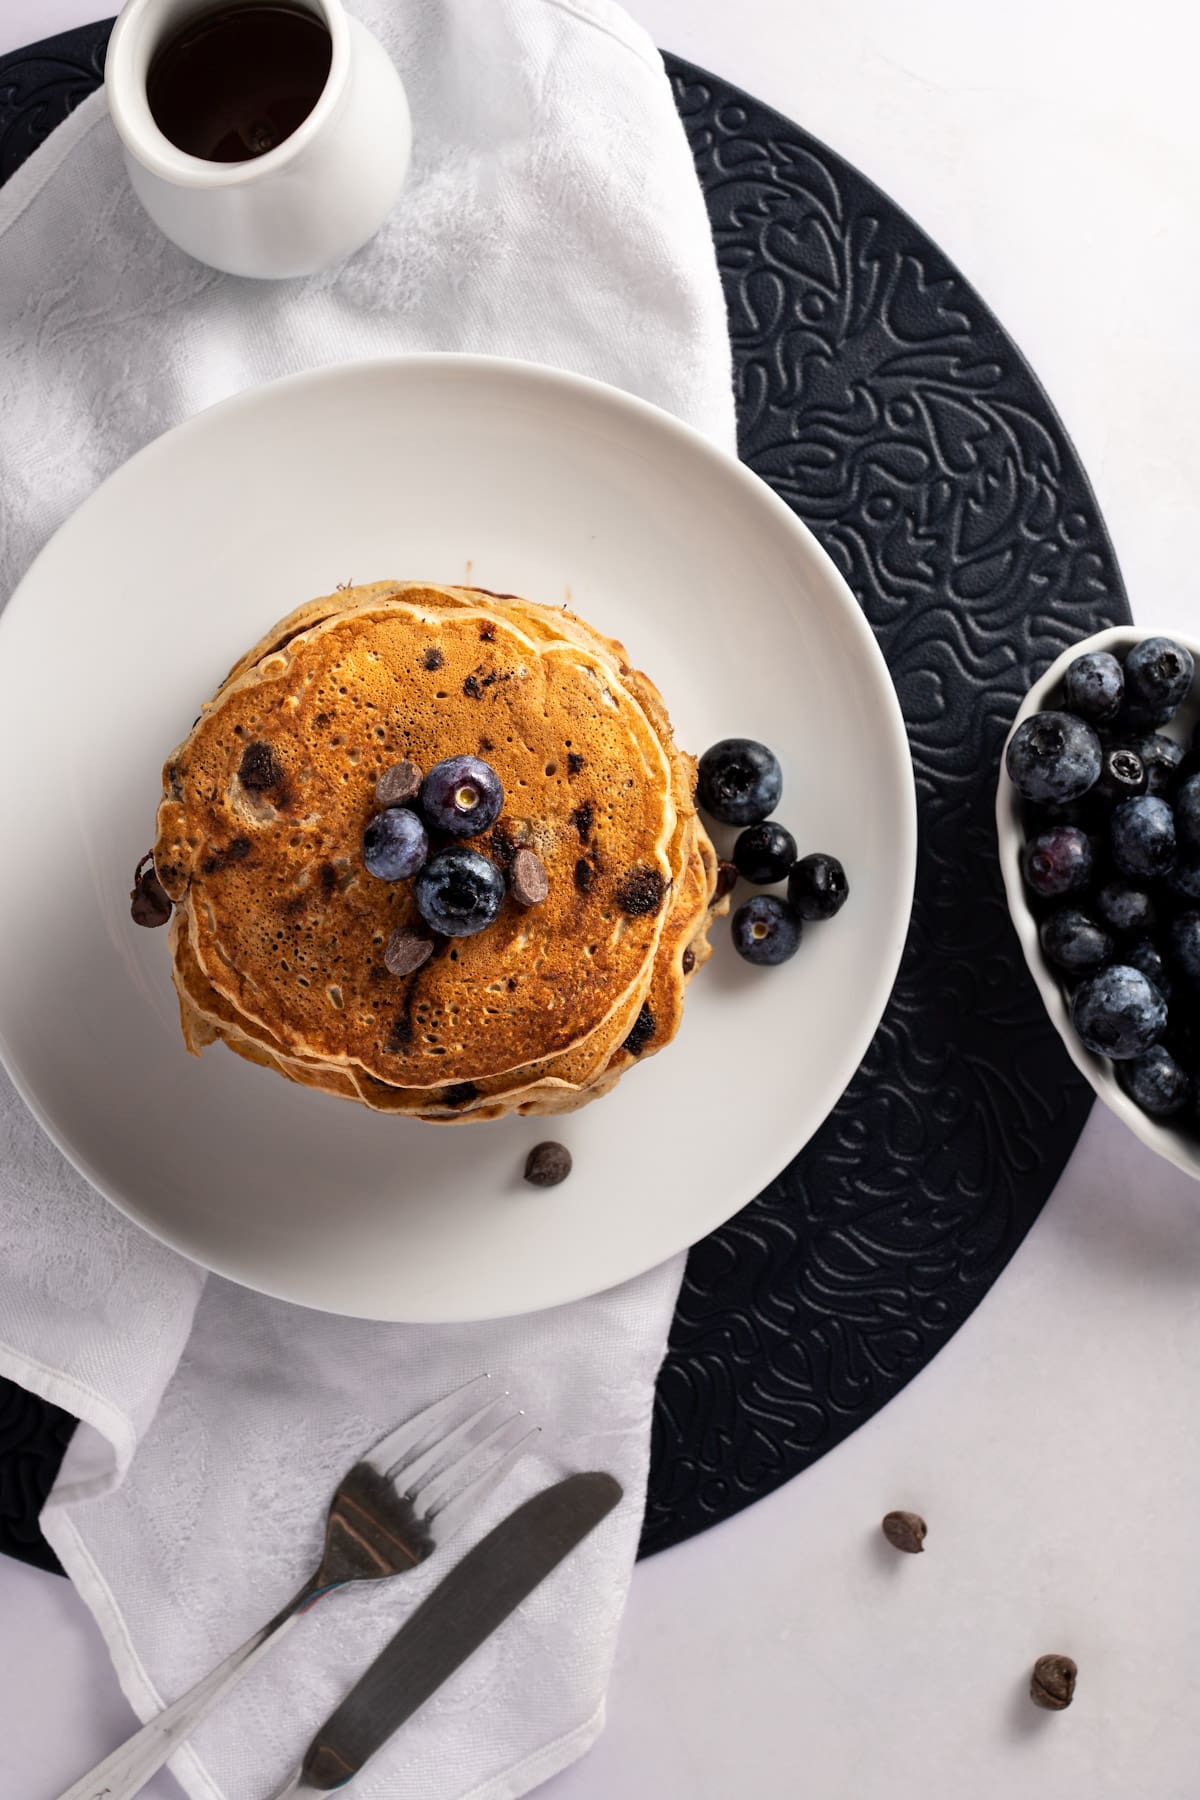 Overhead view of a stack of pancakes topped with blueberries, sitting on a white plate with a round blue placemat, white napkin and silver fork and knife.